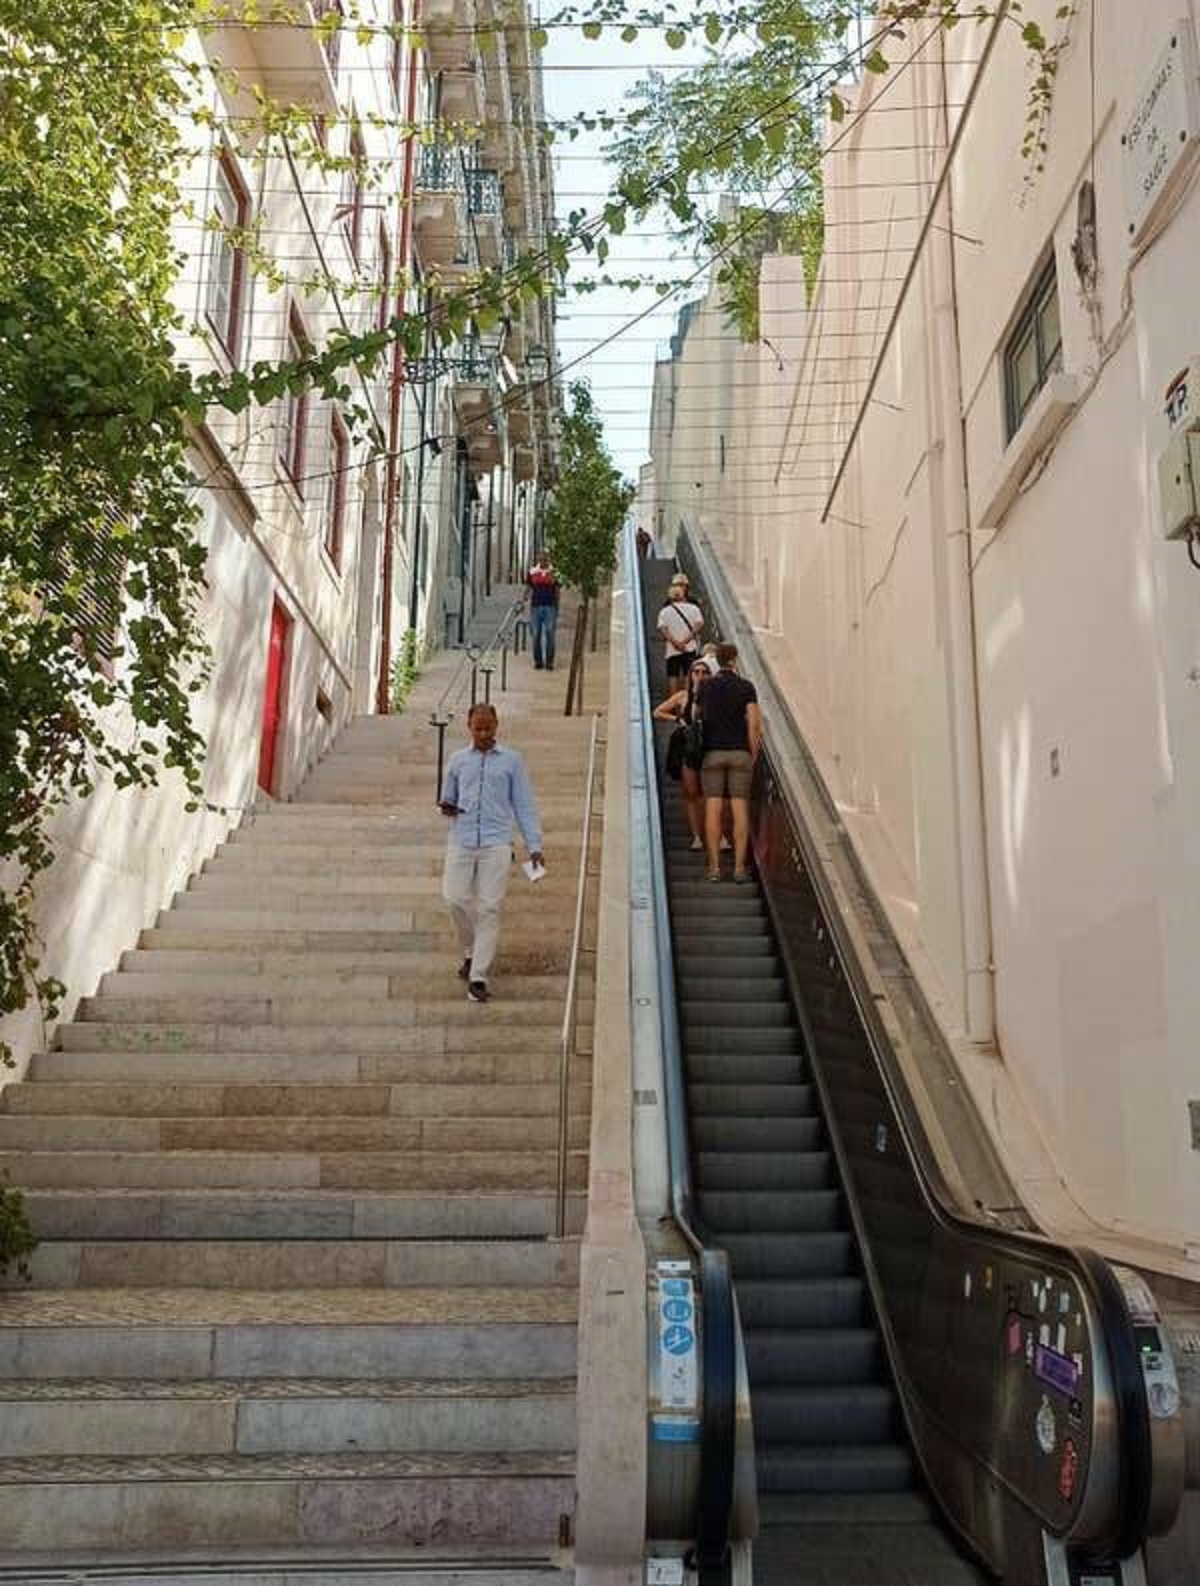 Lisbon, Portugal has an open-air escalator (why aren't there more of these???).